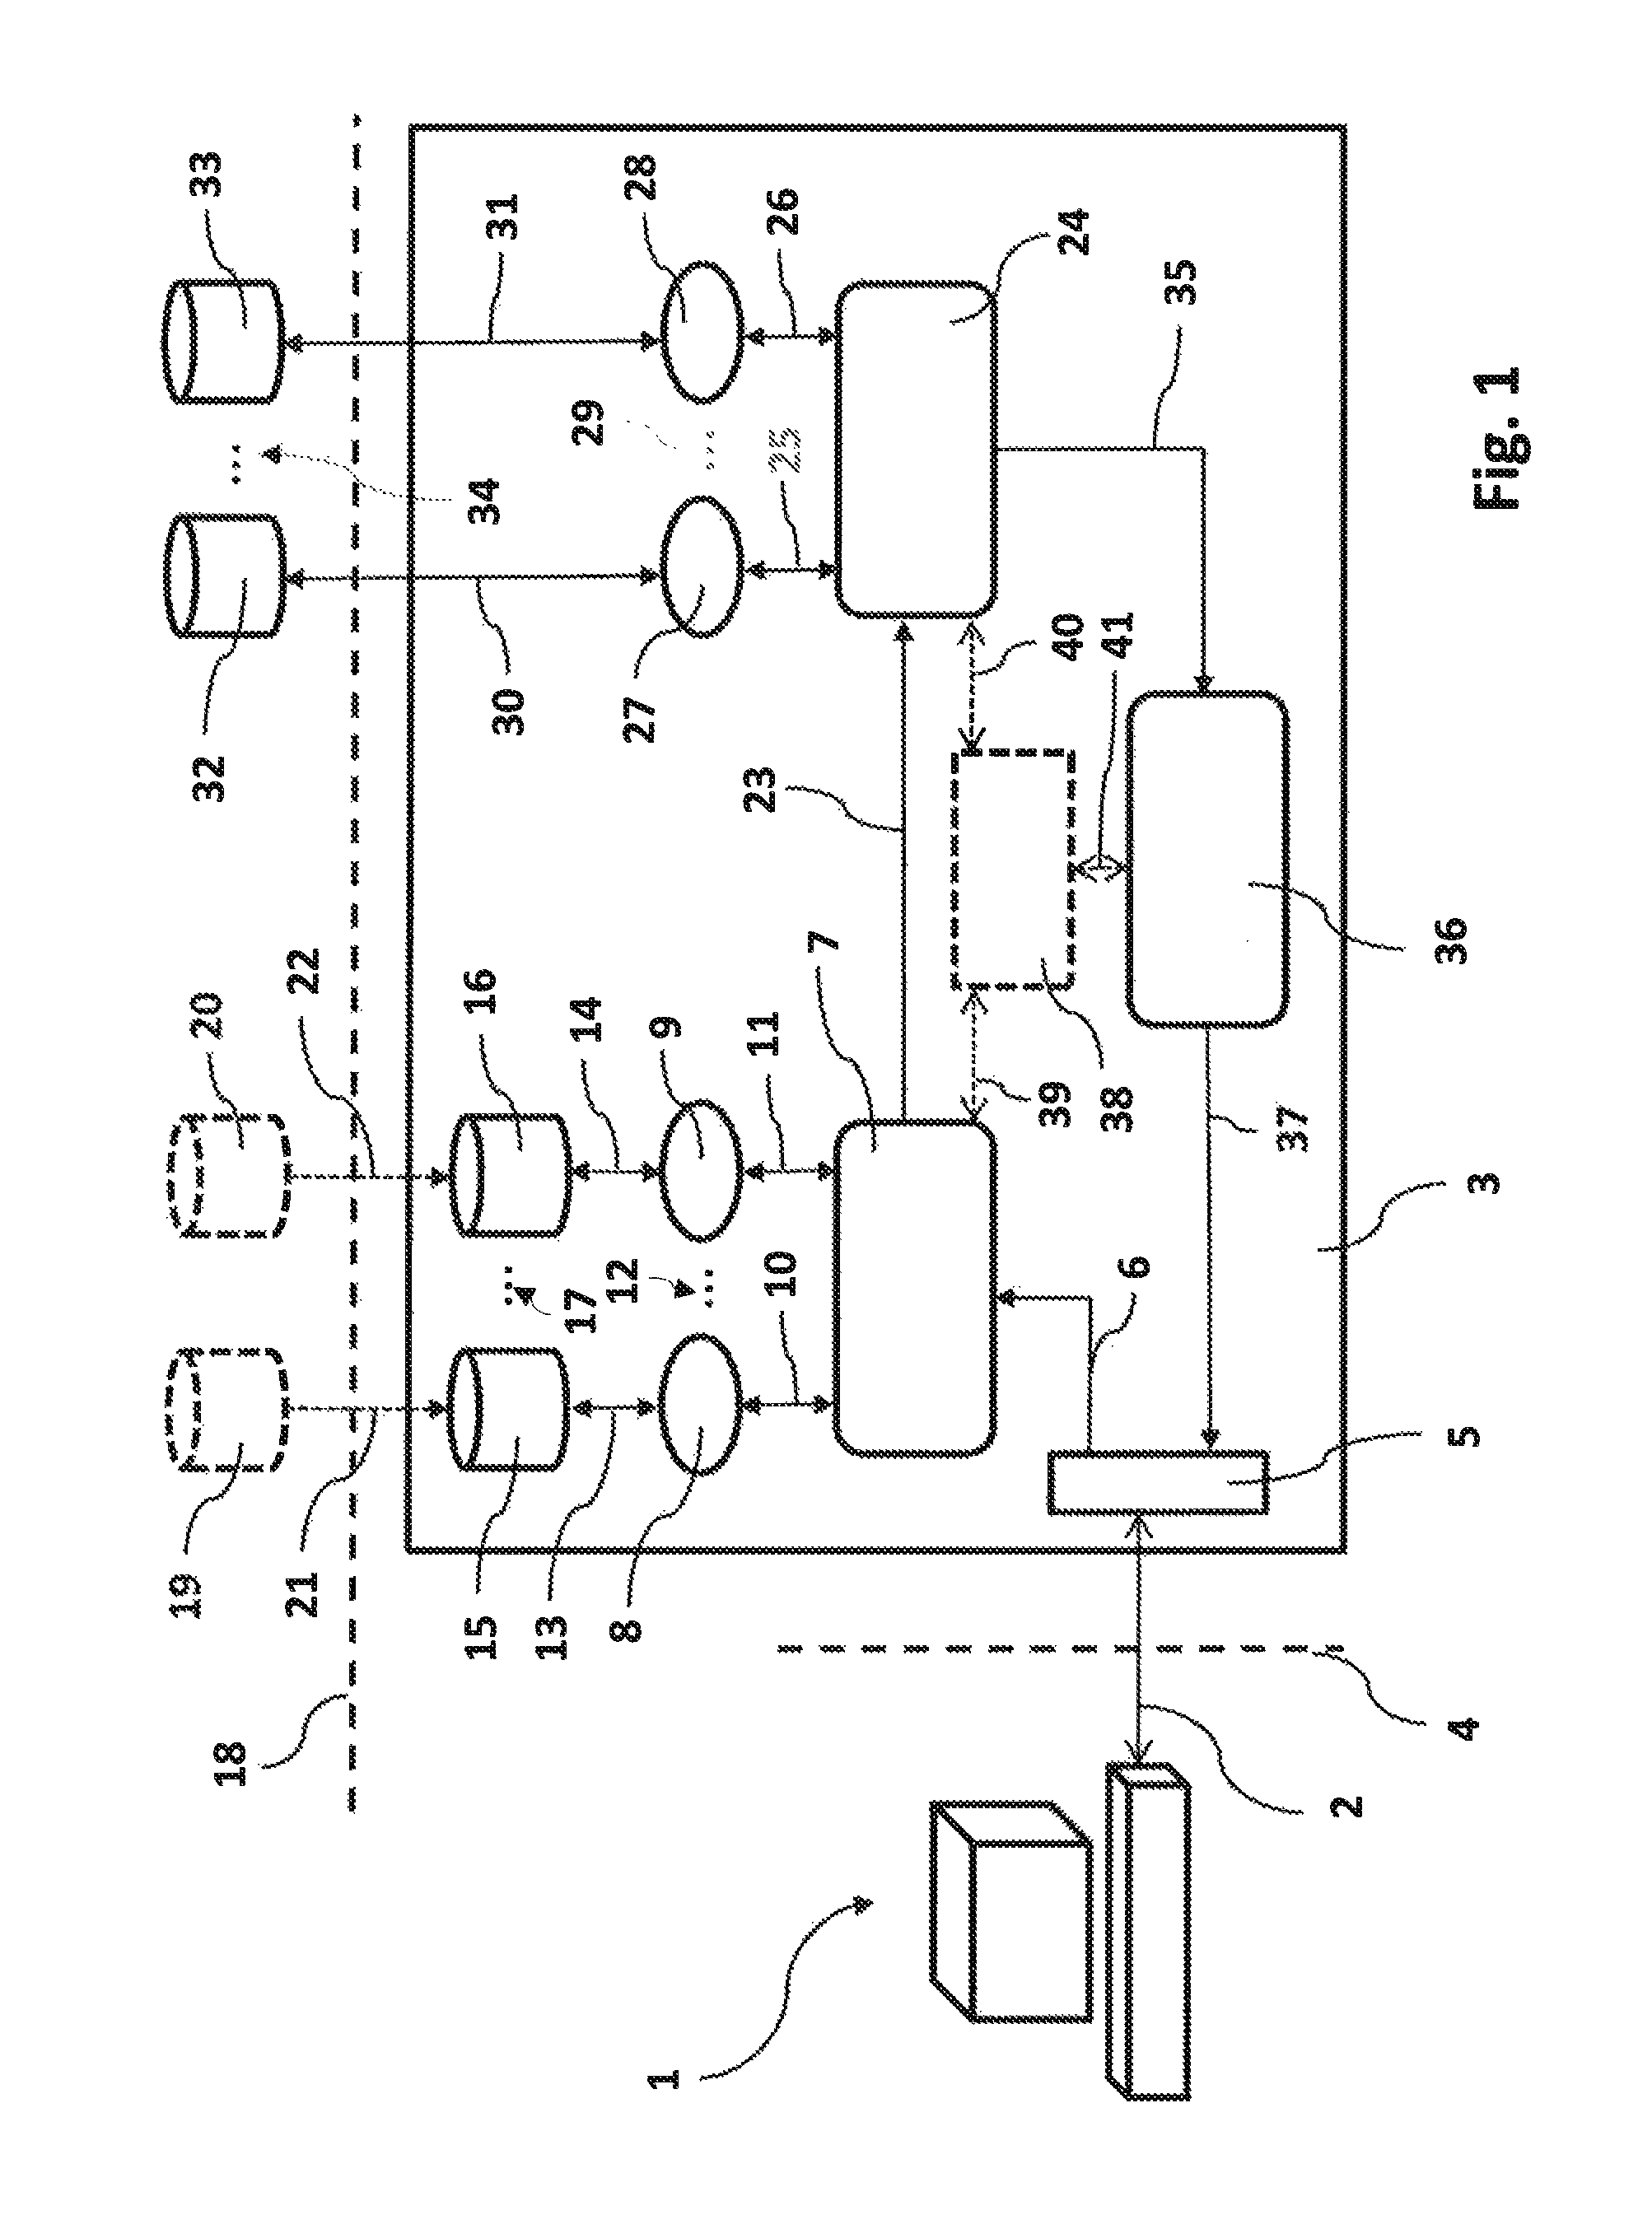 Method and device for performing natural language searches